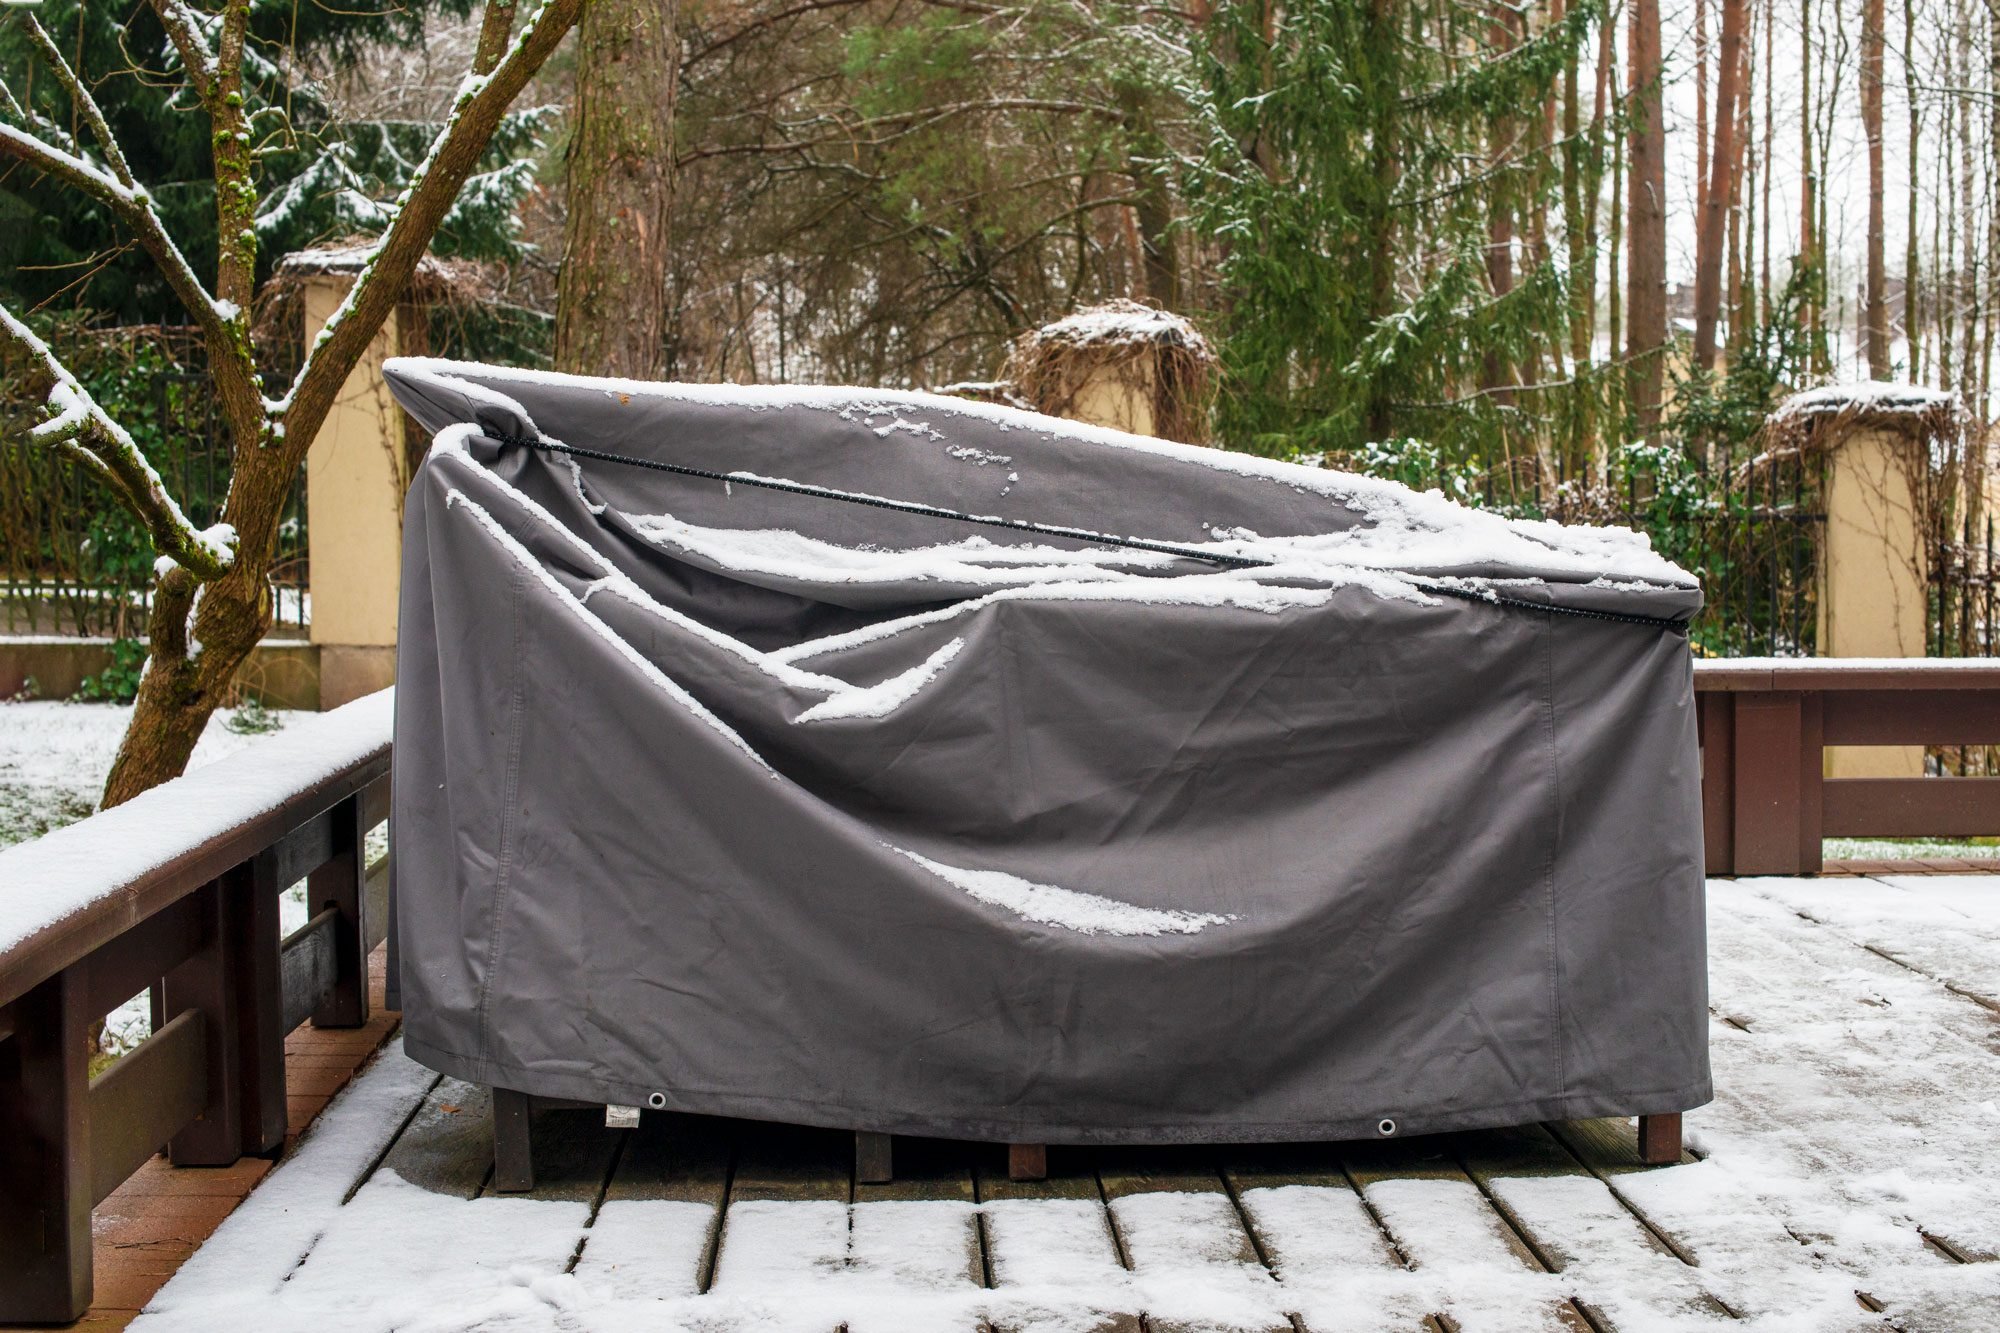 What to Do With Outdoor Furniture in the Winter | The Family Handyman